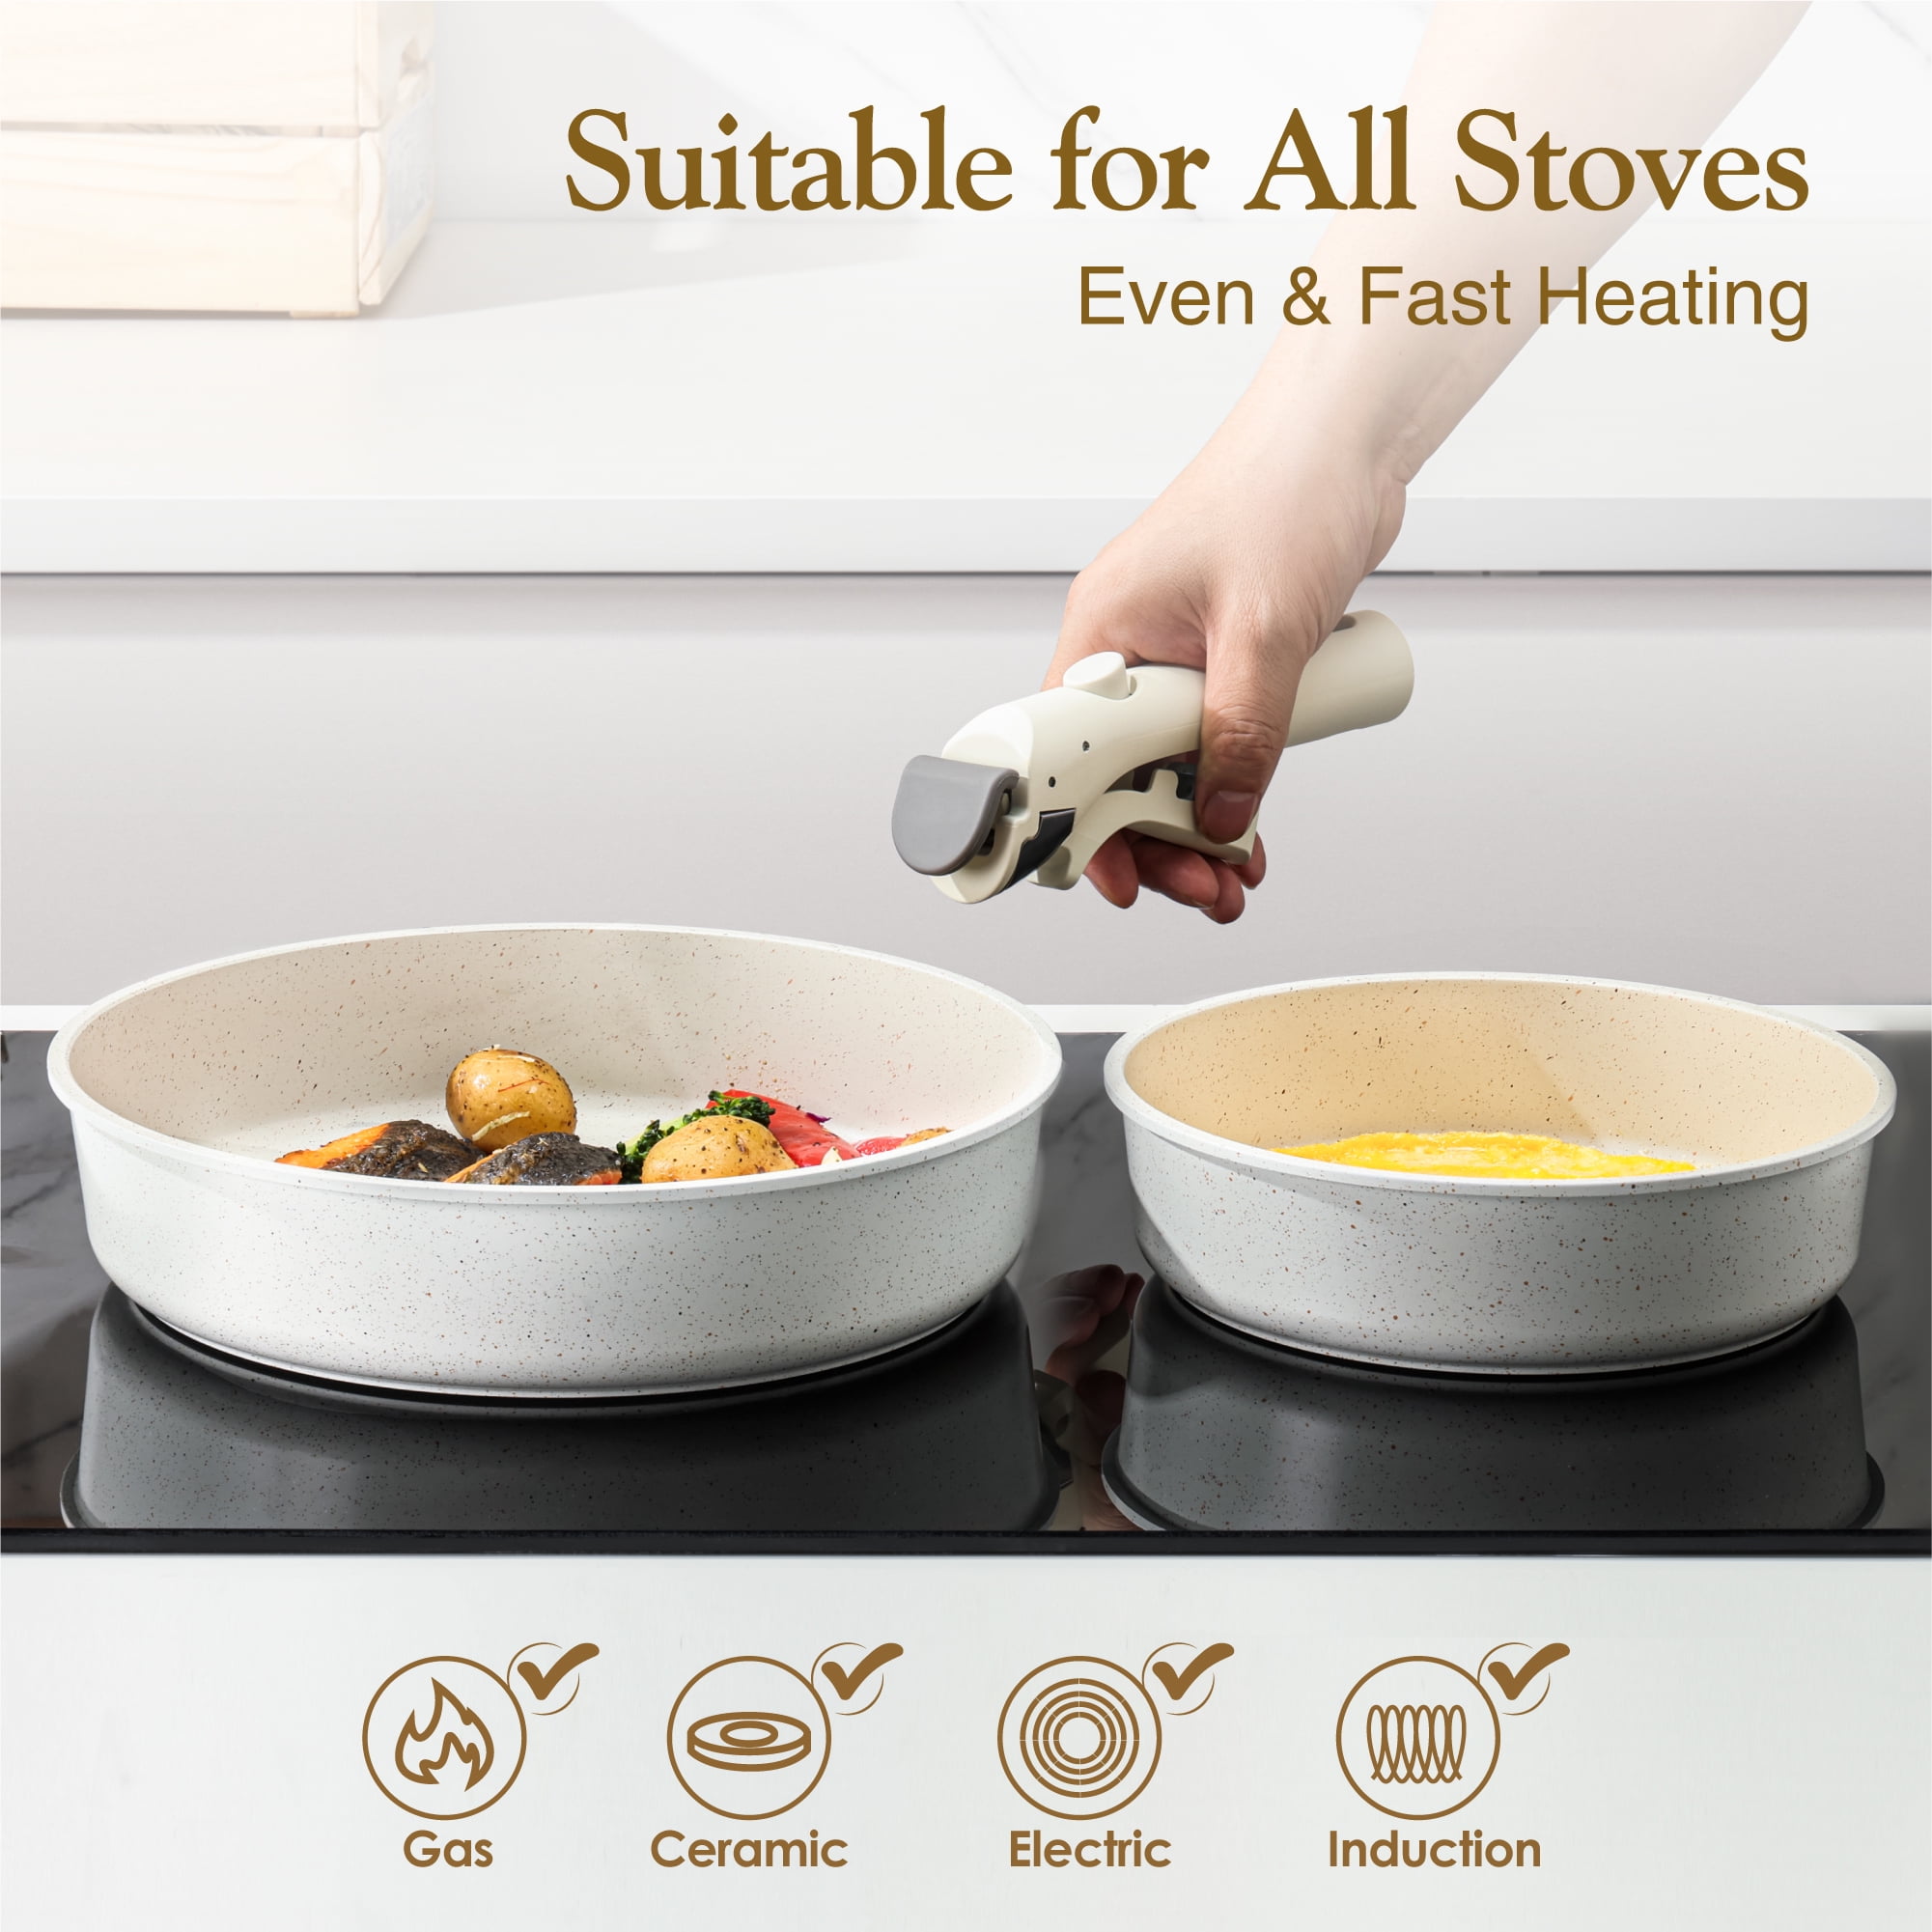 Stainless Steel Smart Cookware with Removable Handle Cookware